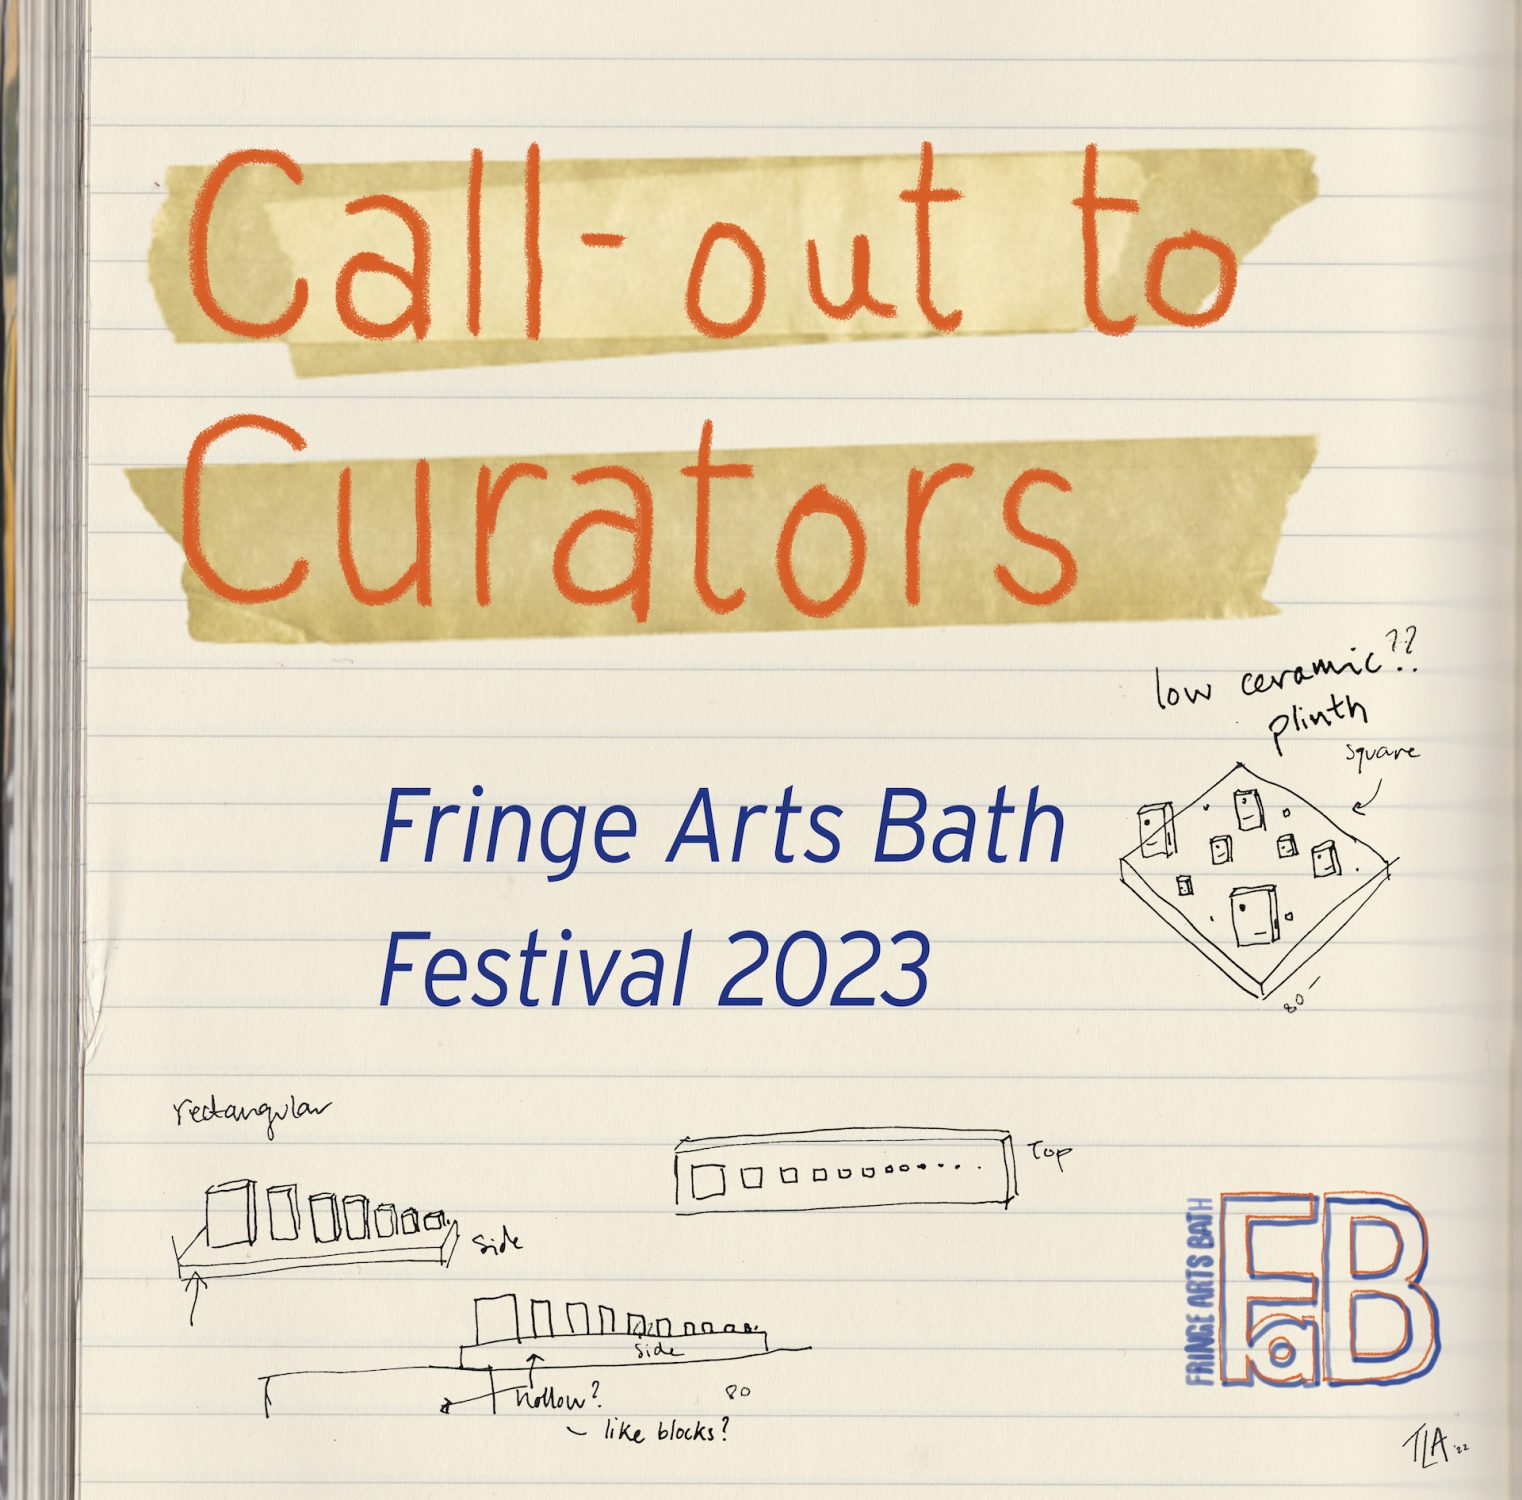 Call for Artists Callout to Curators for Fringe Arts Bath Festival